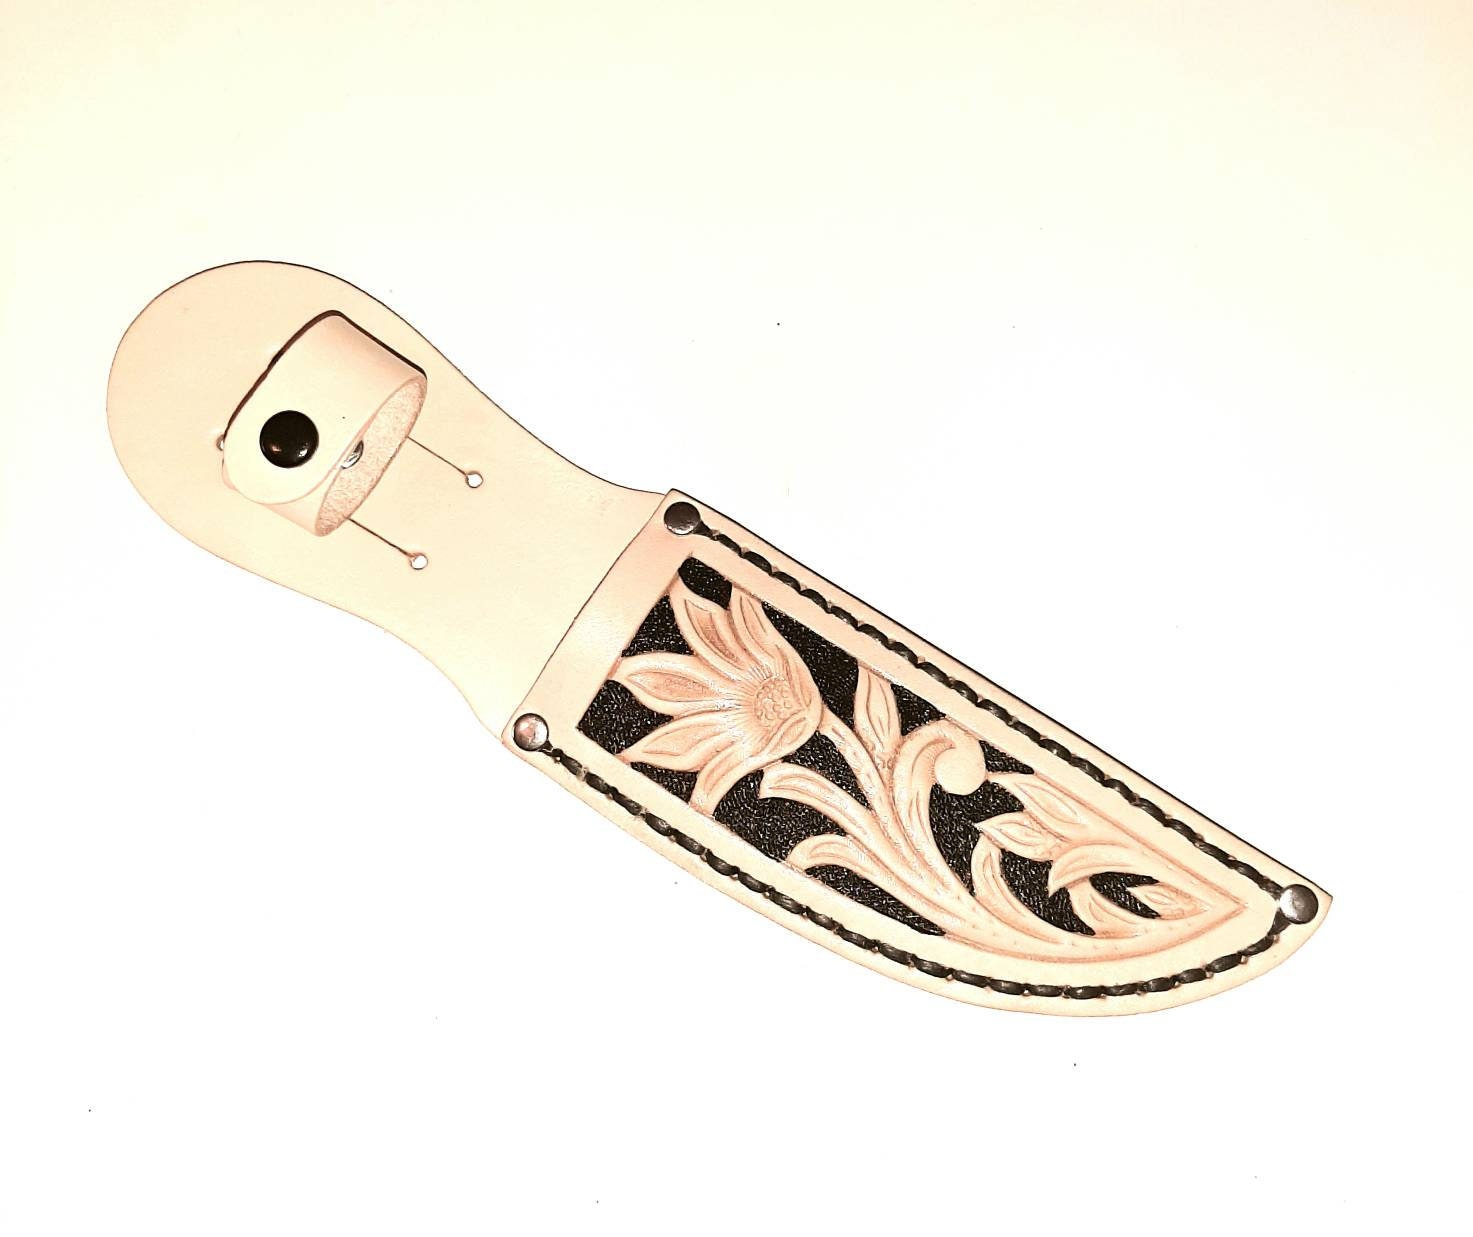 Hilason Leather Angled Knife Scabbard Sheath Cover Floral Tooled Small